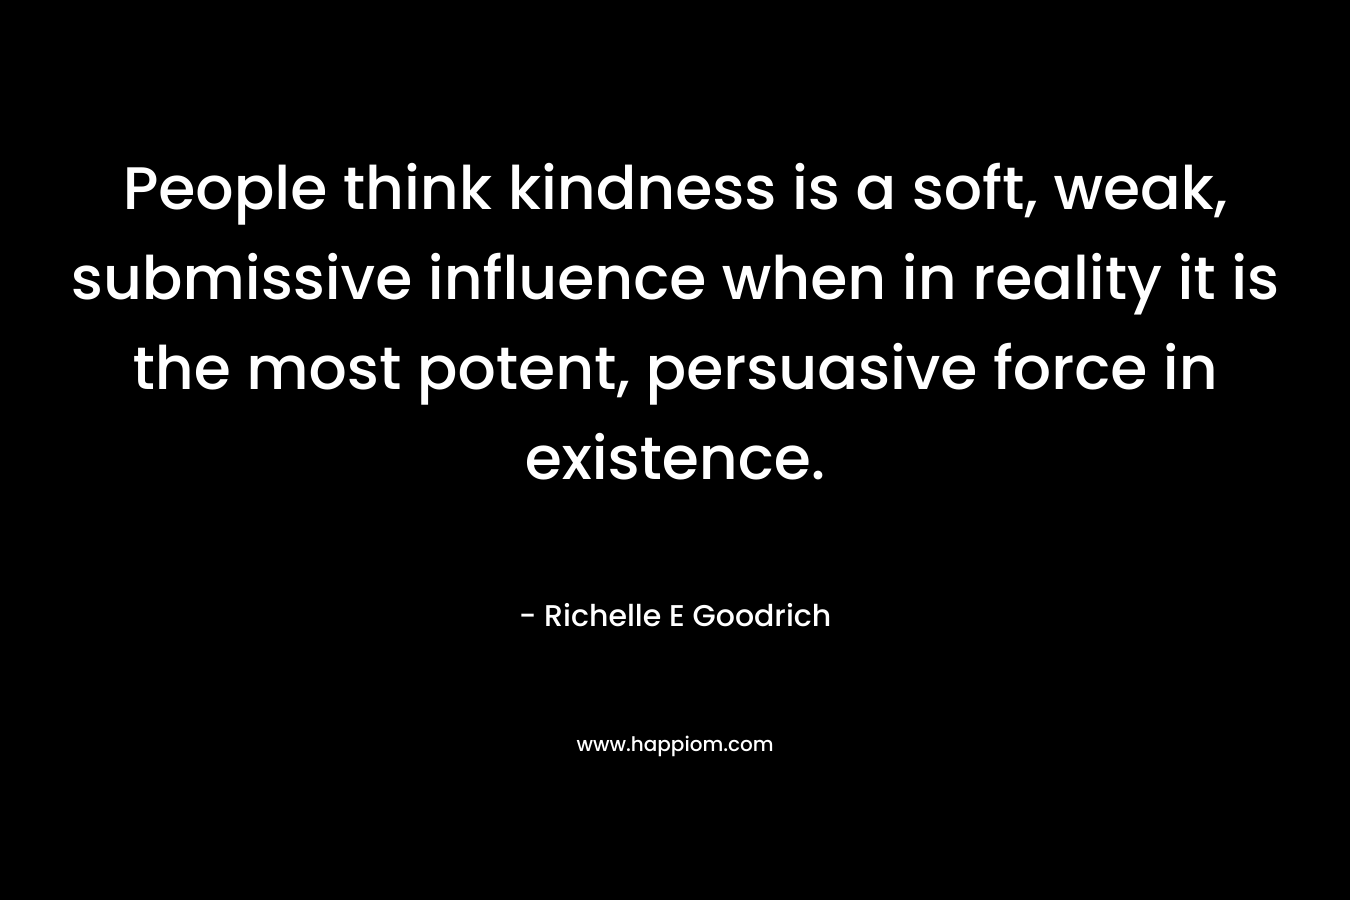 People think kindness is a soft, weak, submissive influence when in reality it is the most potent, persuasive force in existence.